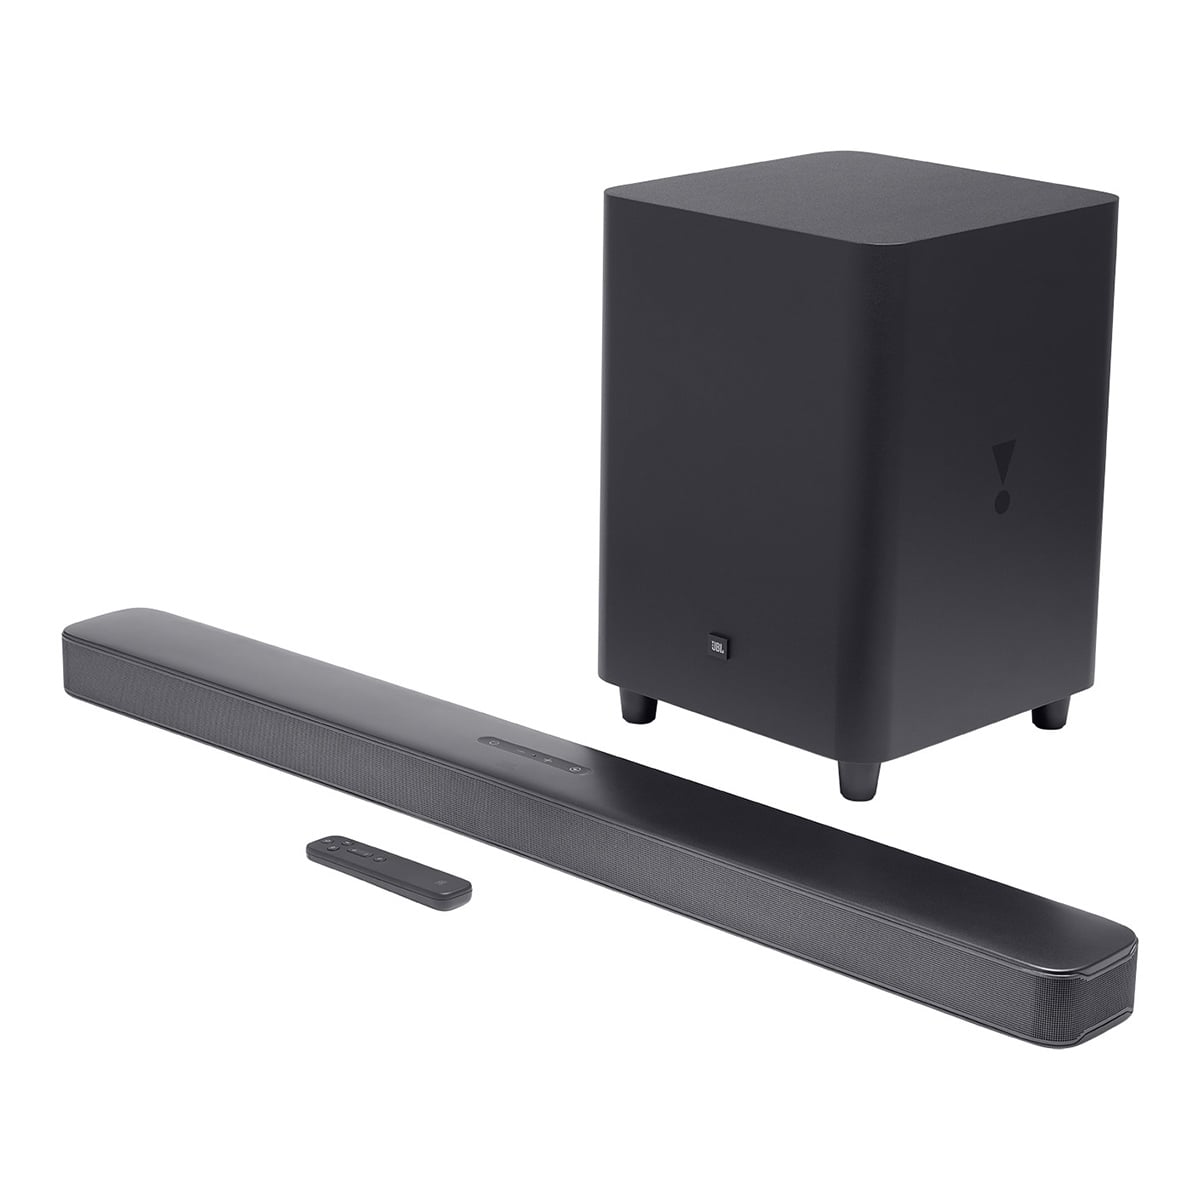 Samsung Game Day Home Theater System with 65" QN65Q80BA TV and JBL Bar 5.1 Surround Soundbar and Sub - Includes Mount, HDMI Cable, Powercenter and Screen Cleaning Kit